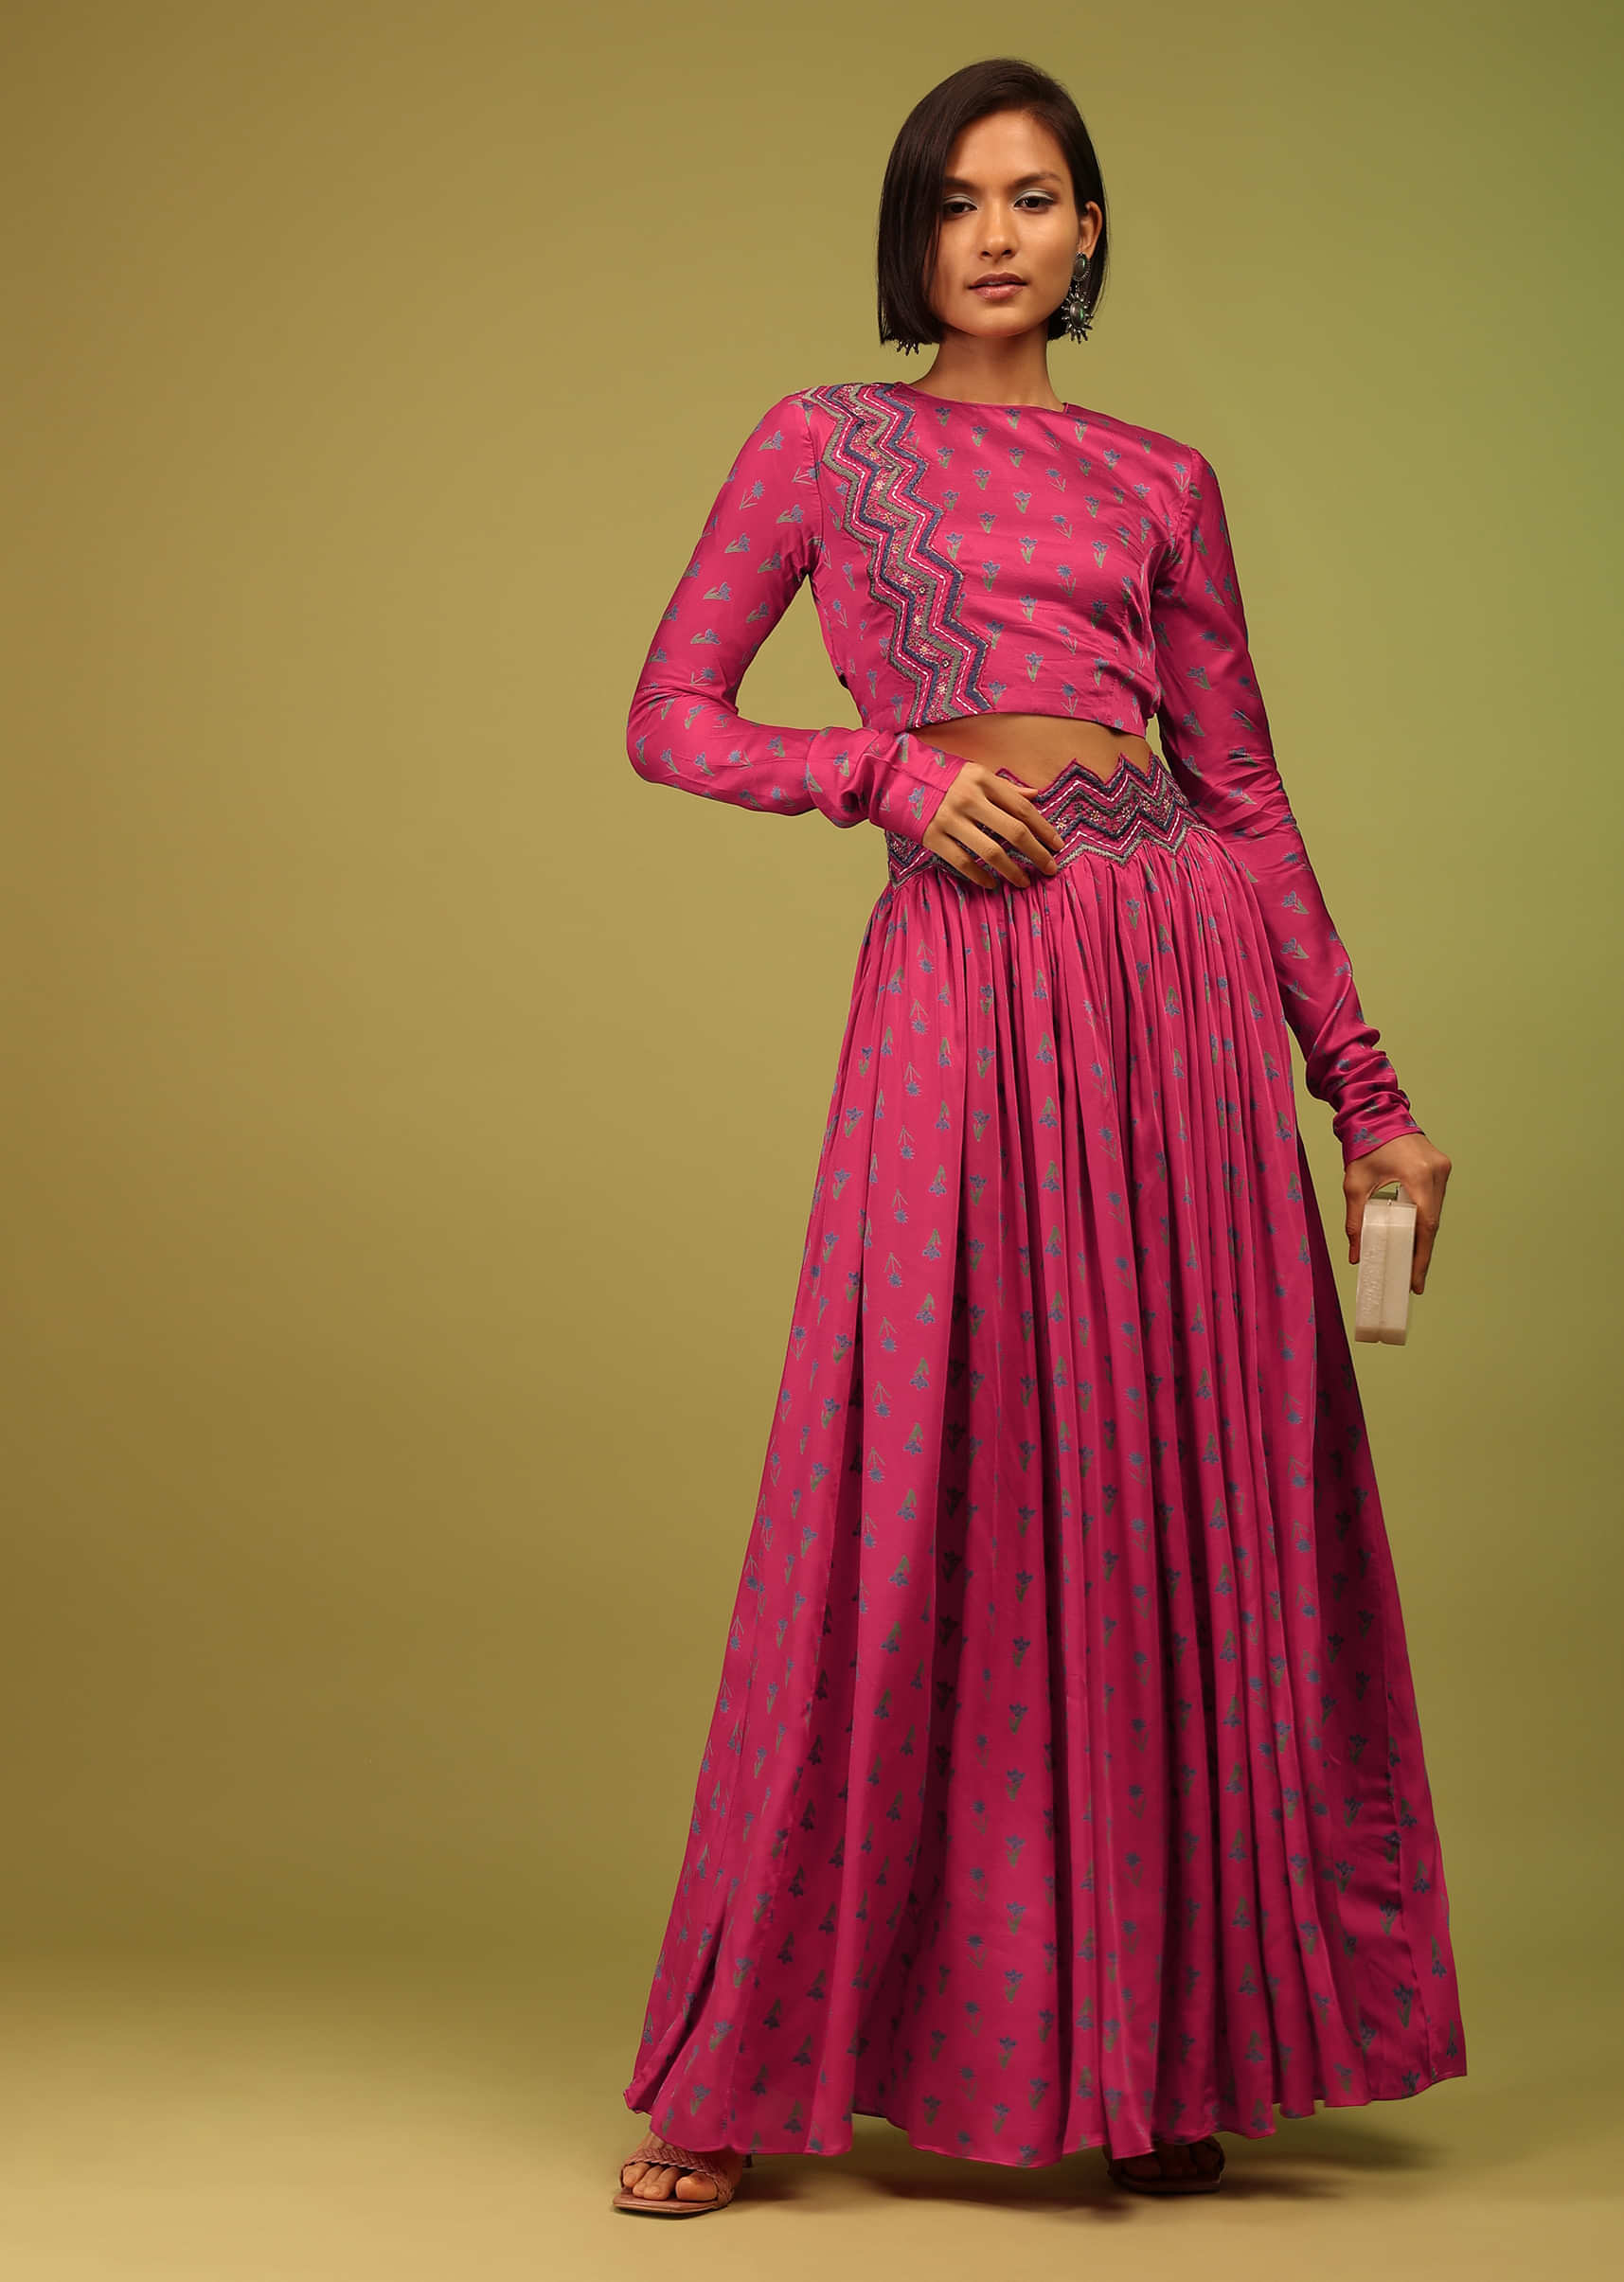 Kalki Azalea Pink Crop Top And Lehenga In Cotton Silk With Floral Print & Embroidery